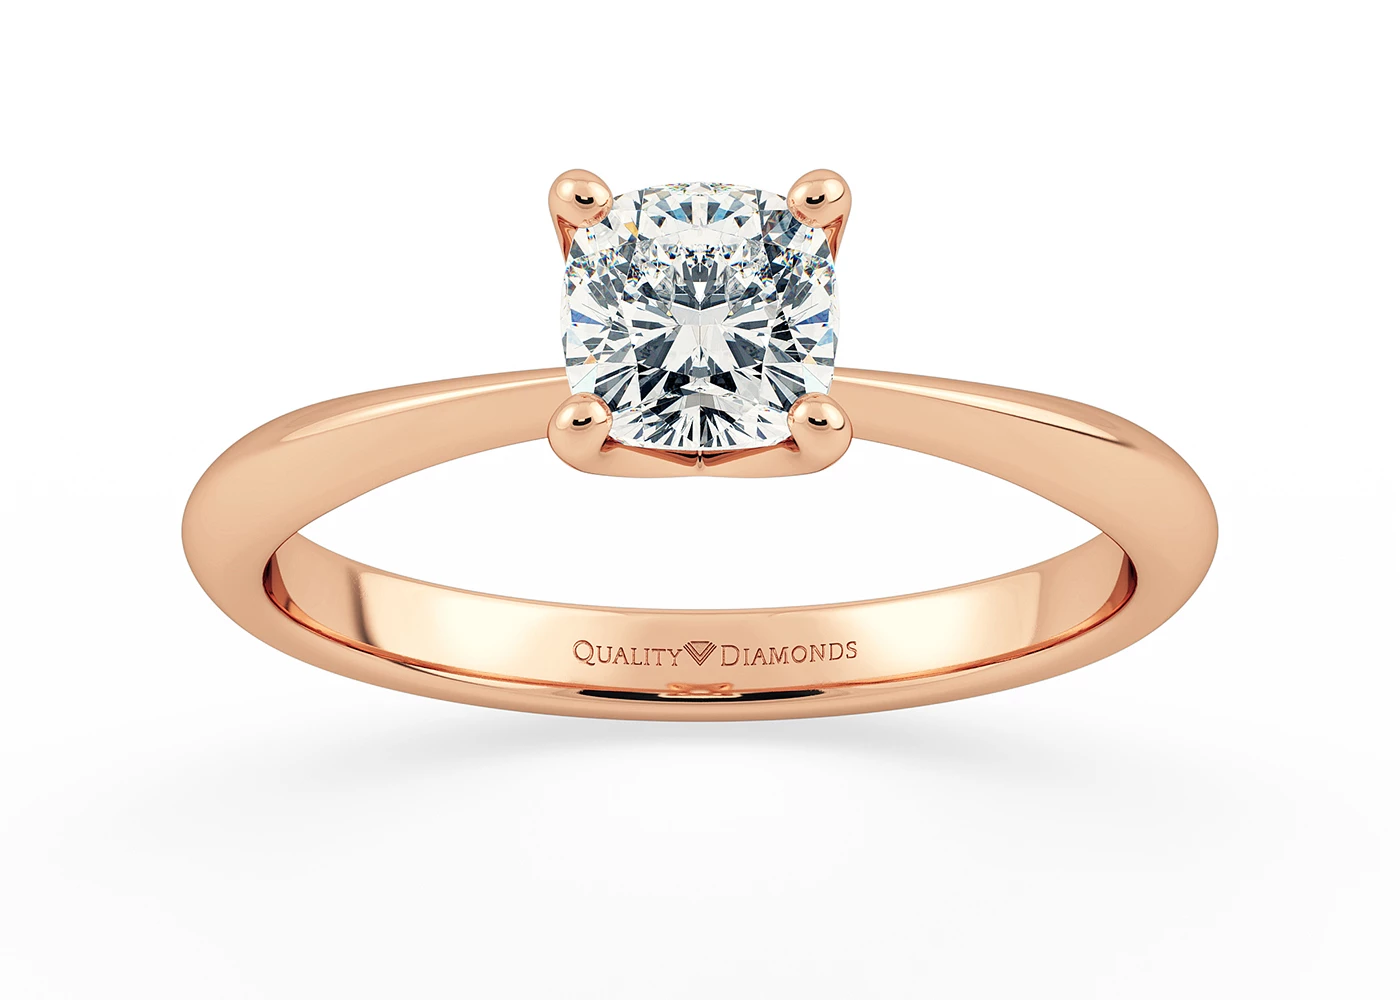 One Carat Cushion Solitaire Diamond Engagement Ring in 18K Rose Gold